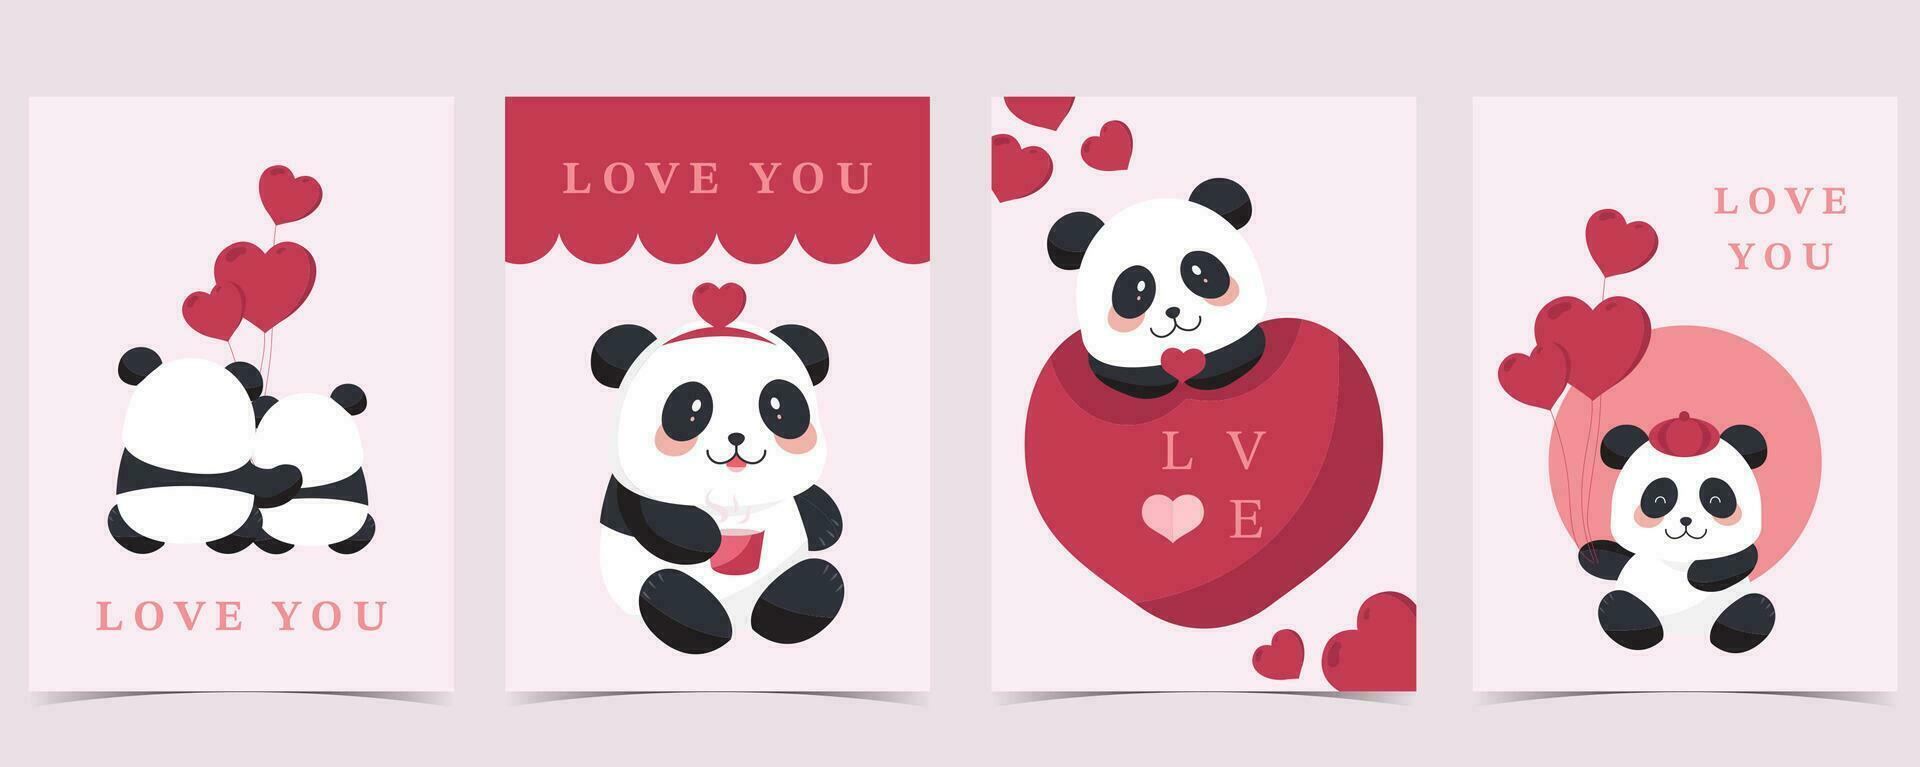 cute panda background set with heart for valentine's day.illustration vector for postcard